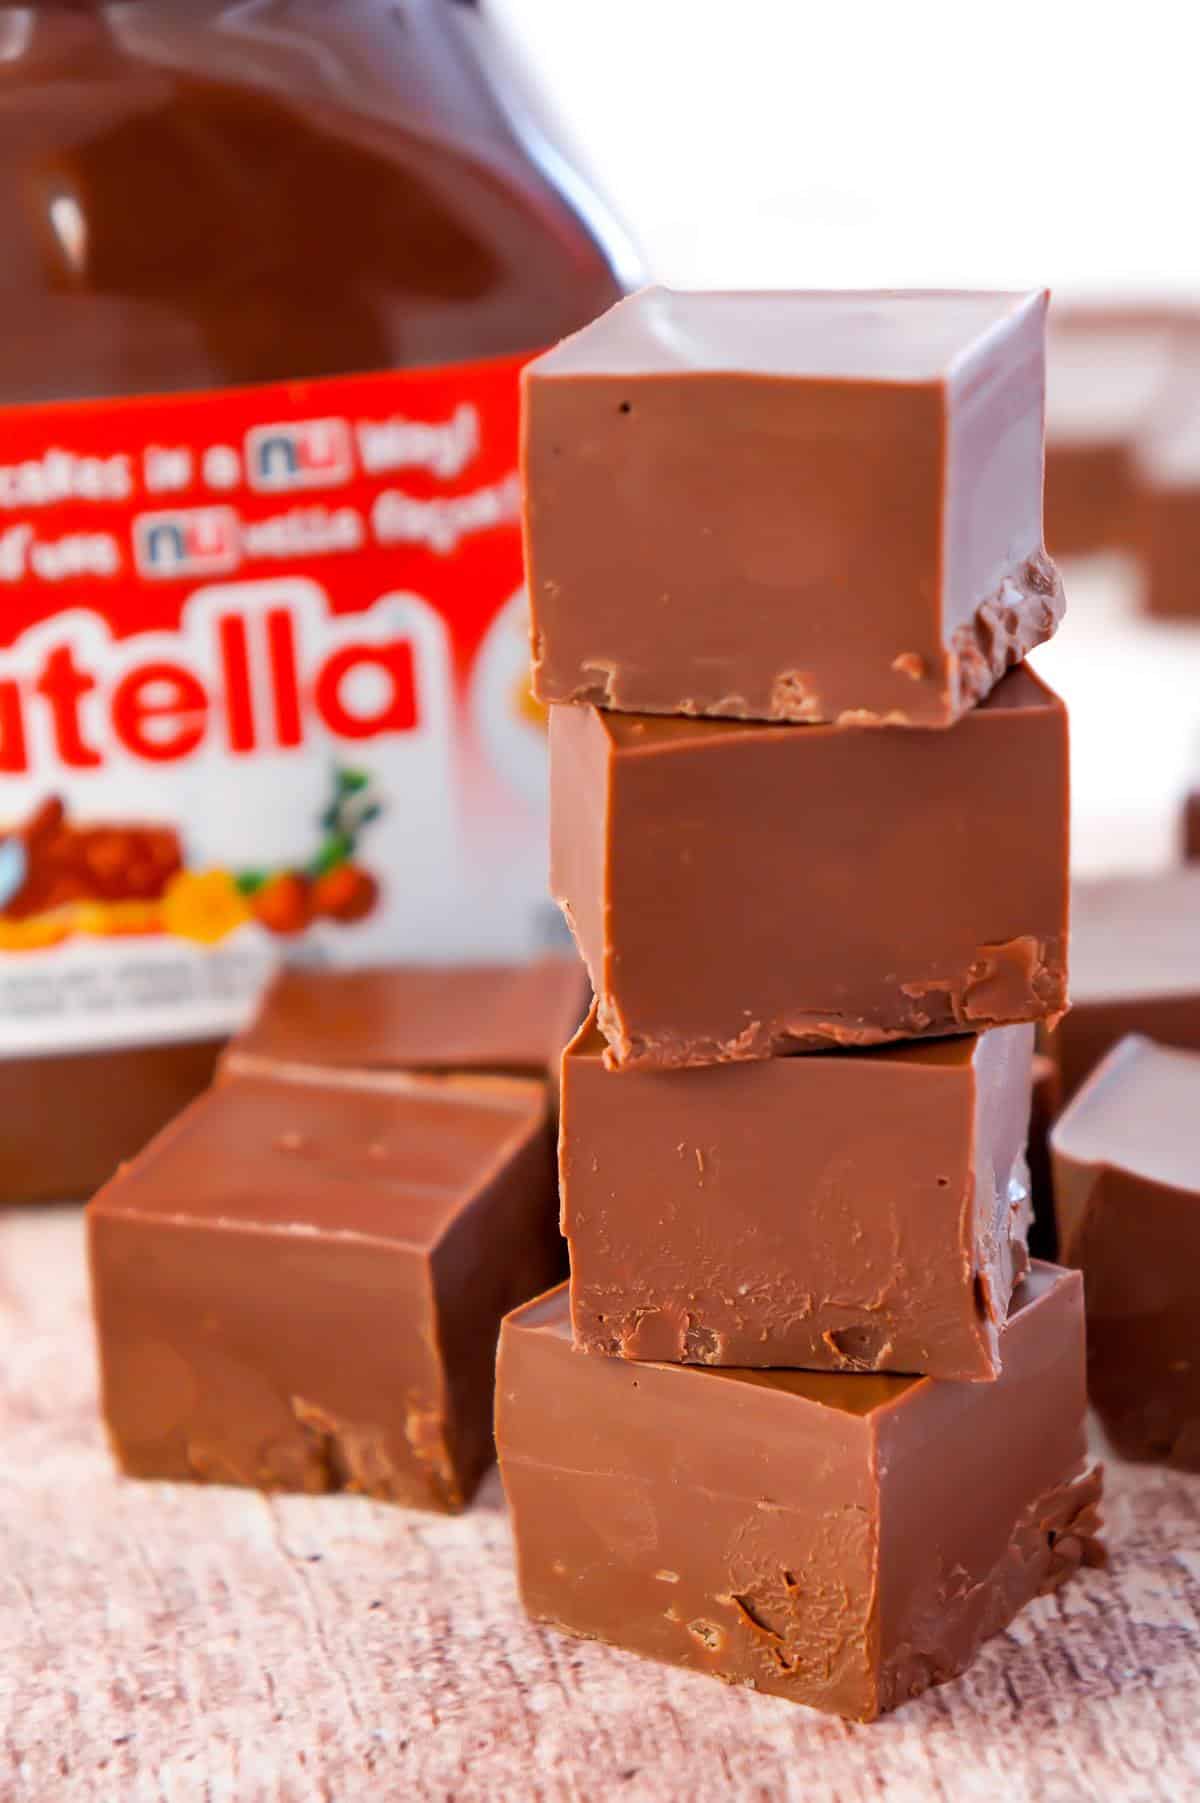 Nutella Fudge is an easy two ingredient microwave fudge recipe using Nutella and milk chocolate chips.